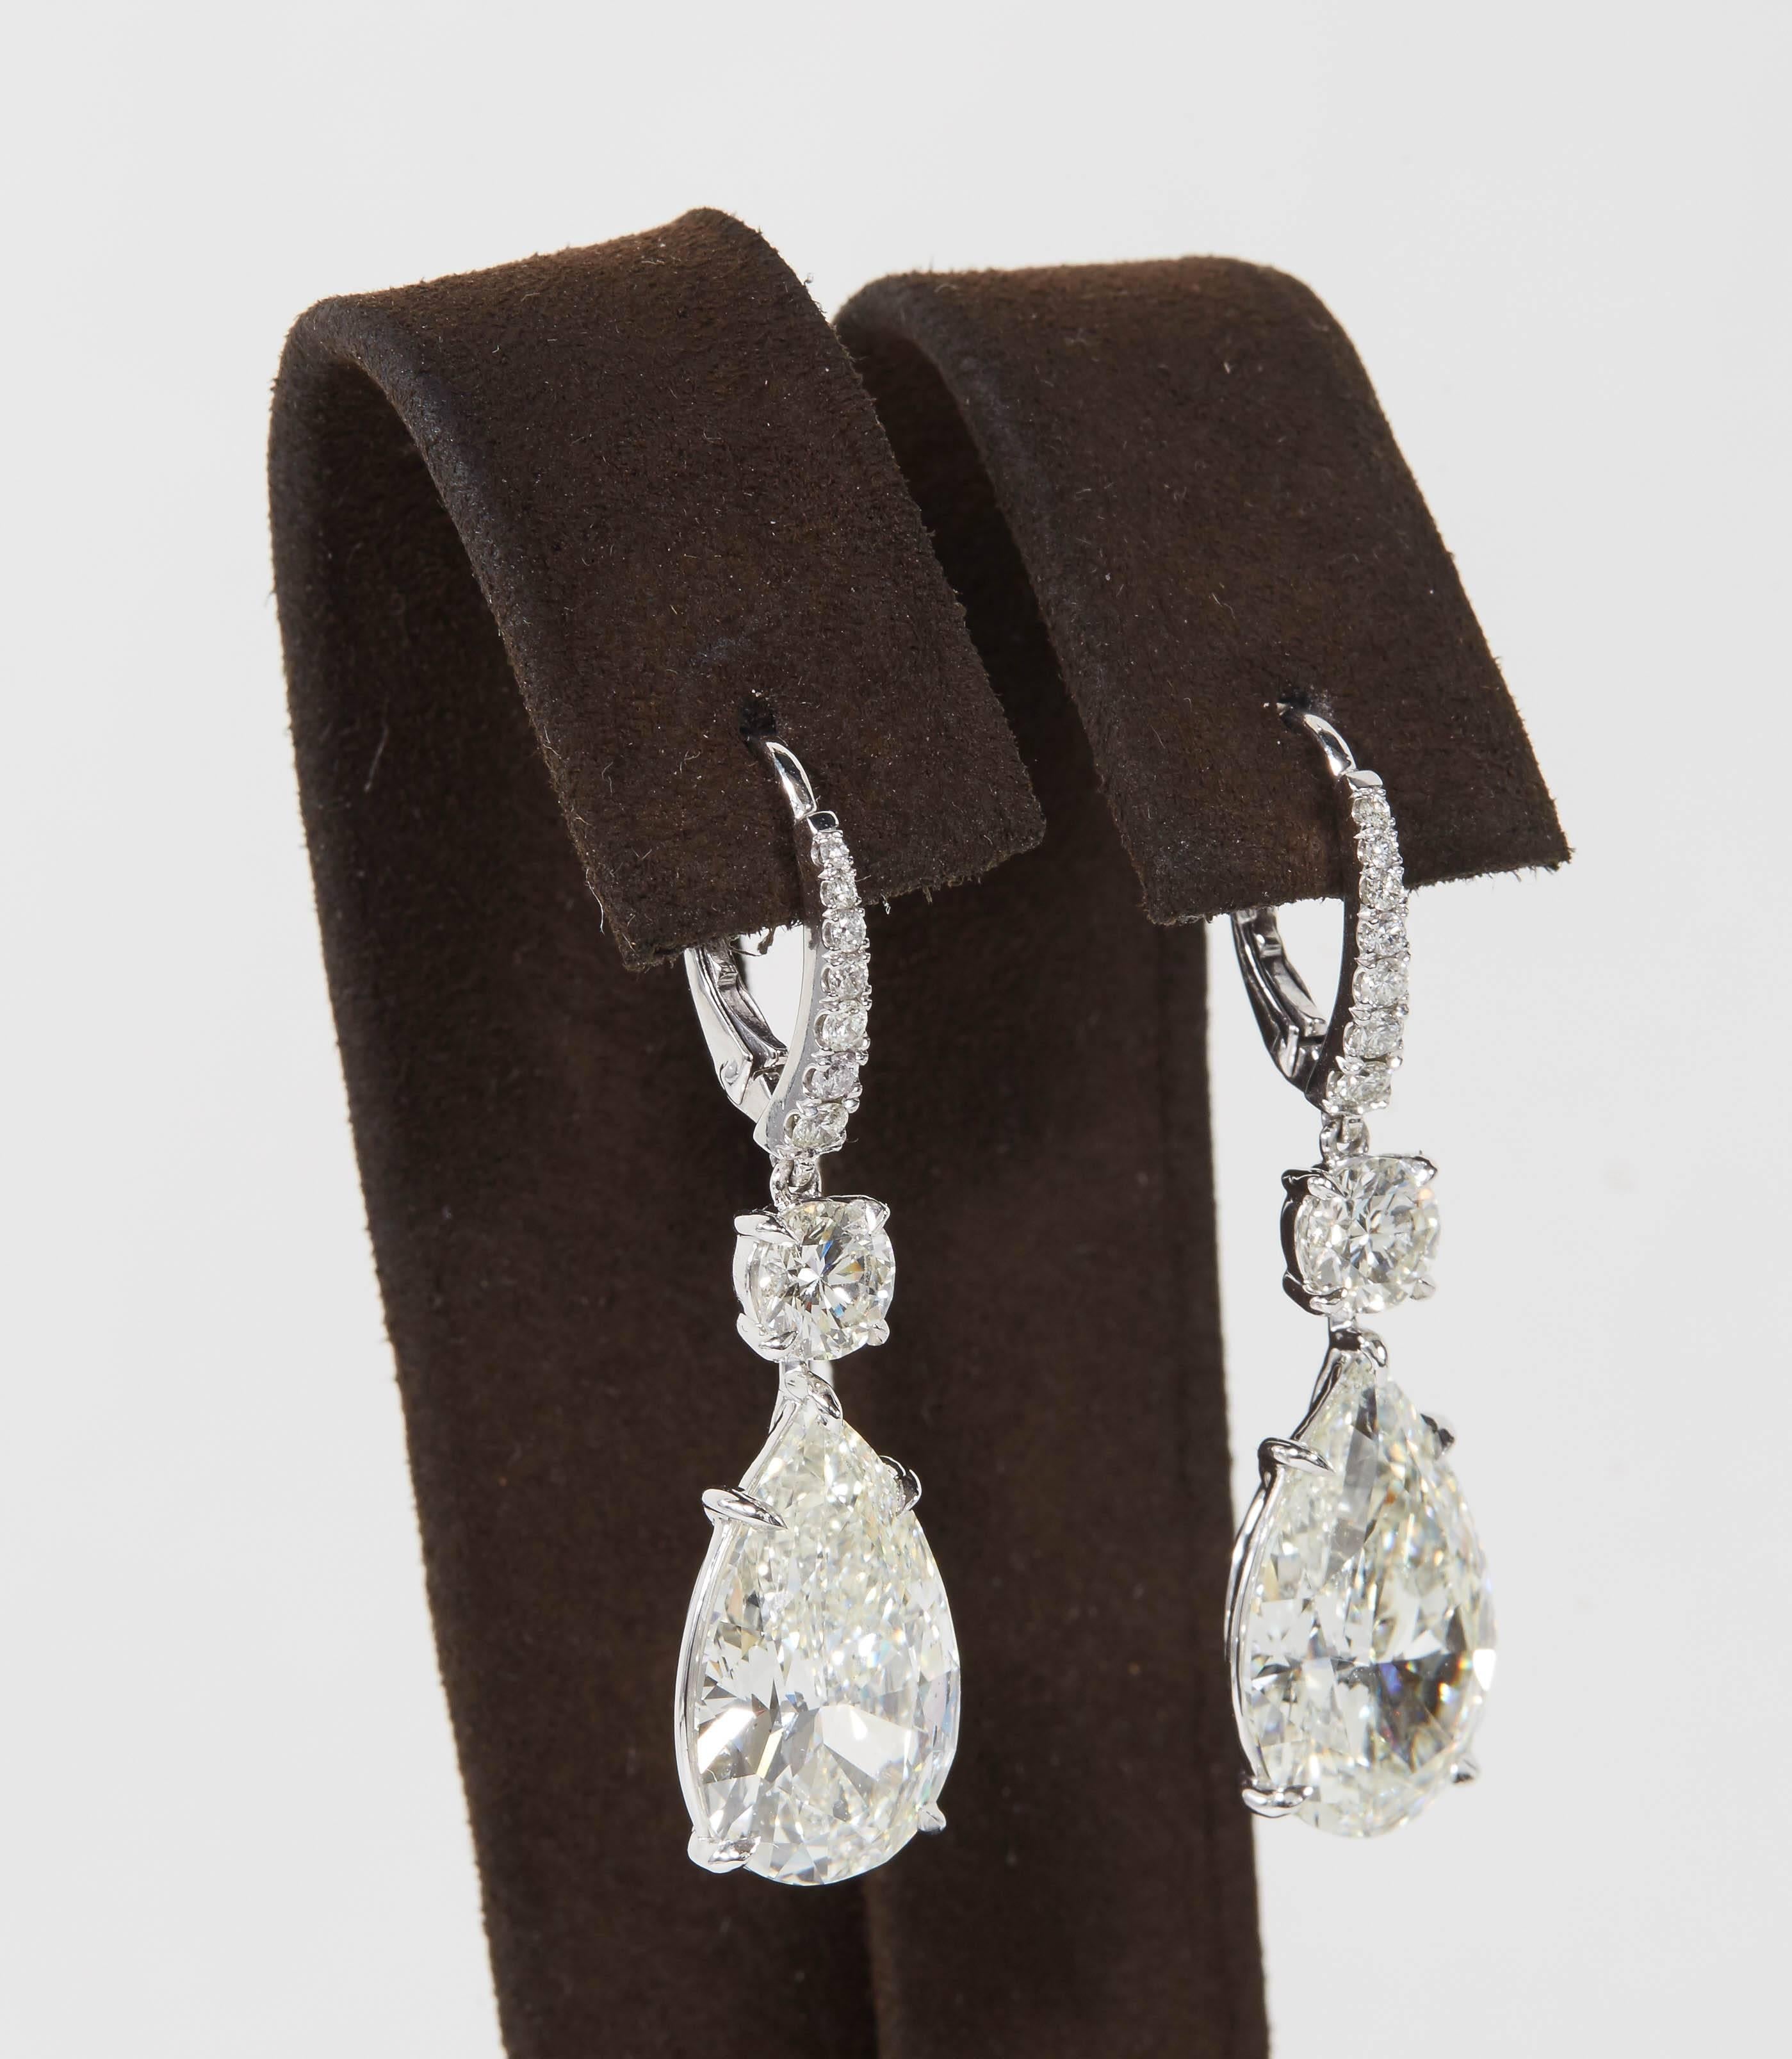 

An INCREDIBLE pair of earrings!!

A beautiful matching pair of GIA certified pear shape diamonds J color SI1 and J SI2.

The pear shaped diamond drops weigh over 6 carats each but have a much larger look, the total carat weight of the two pear